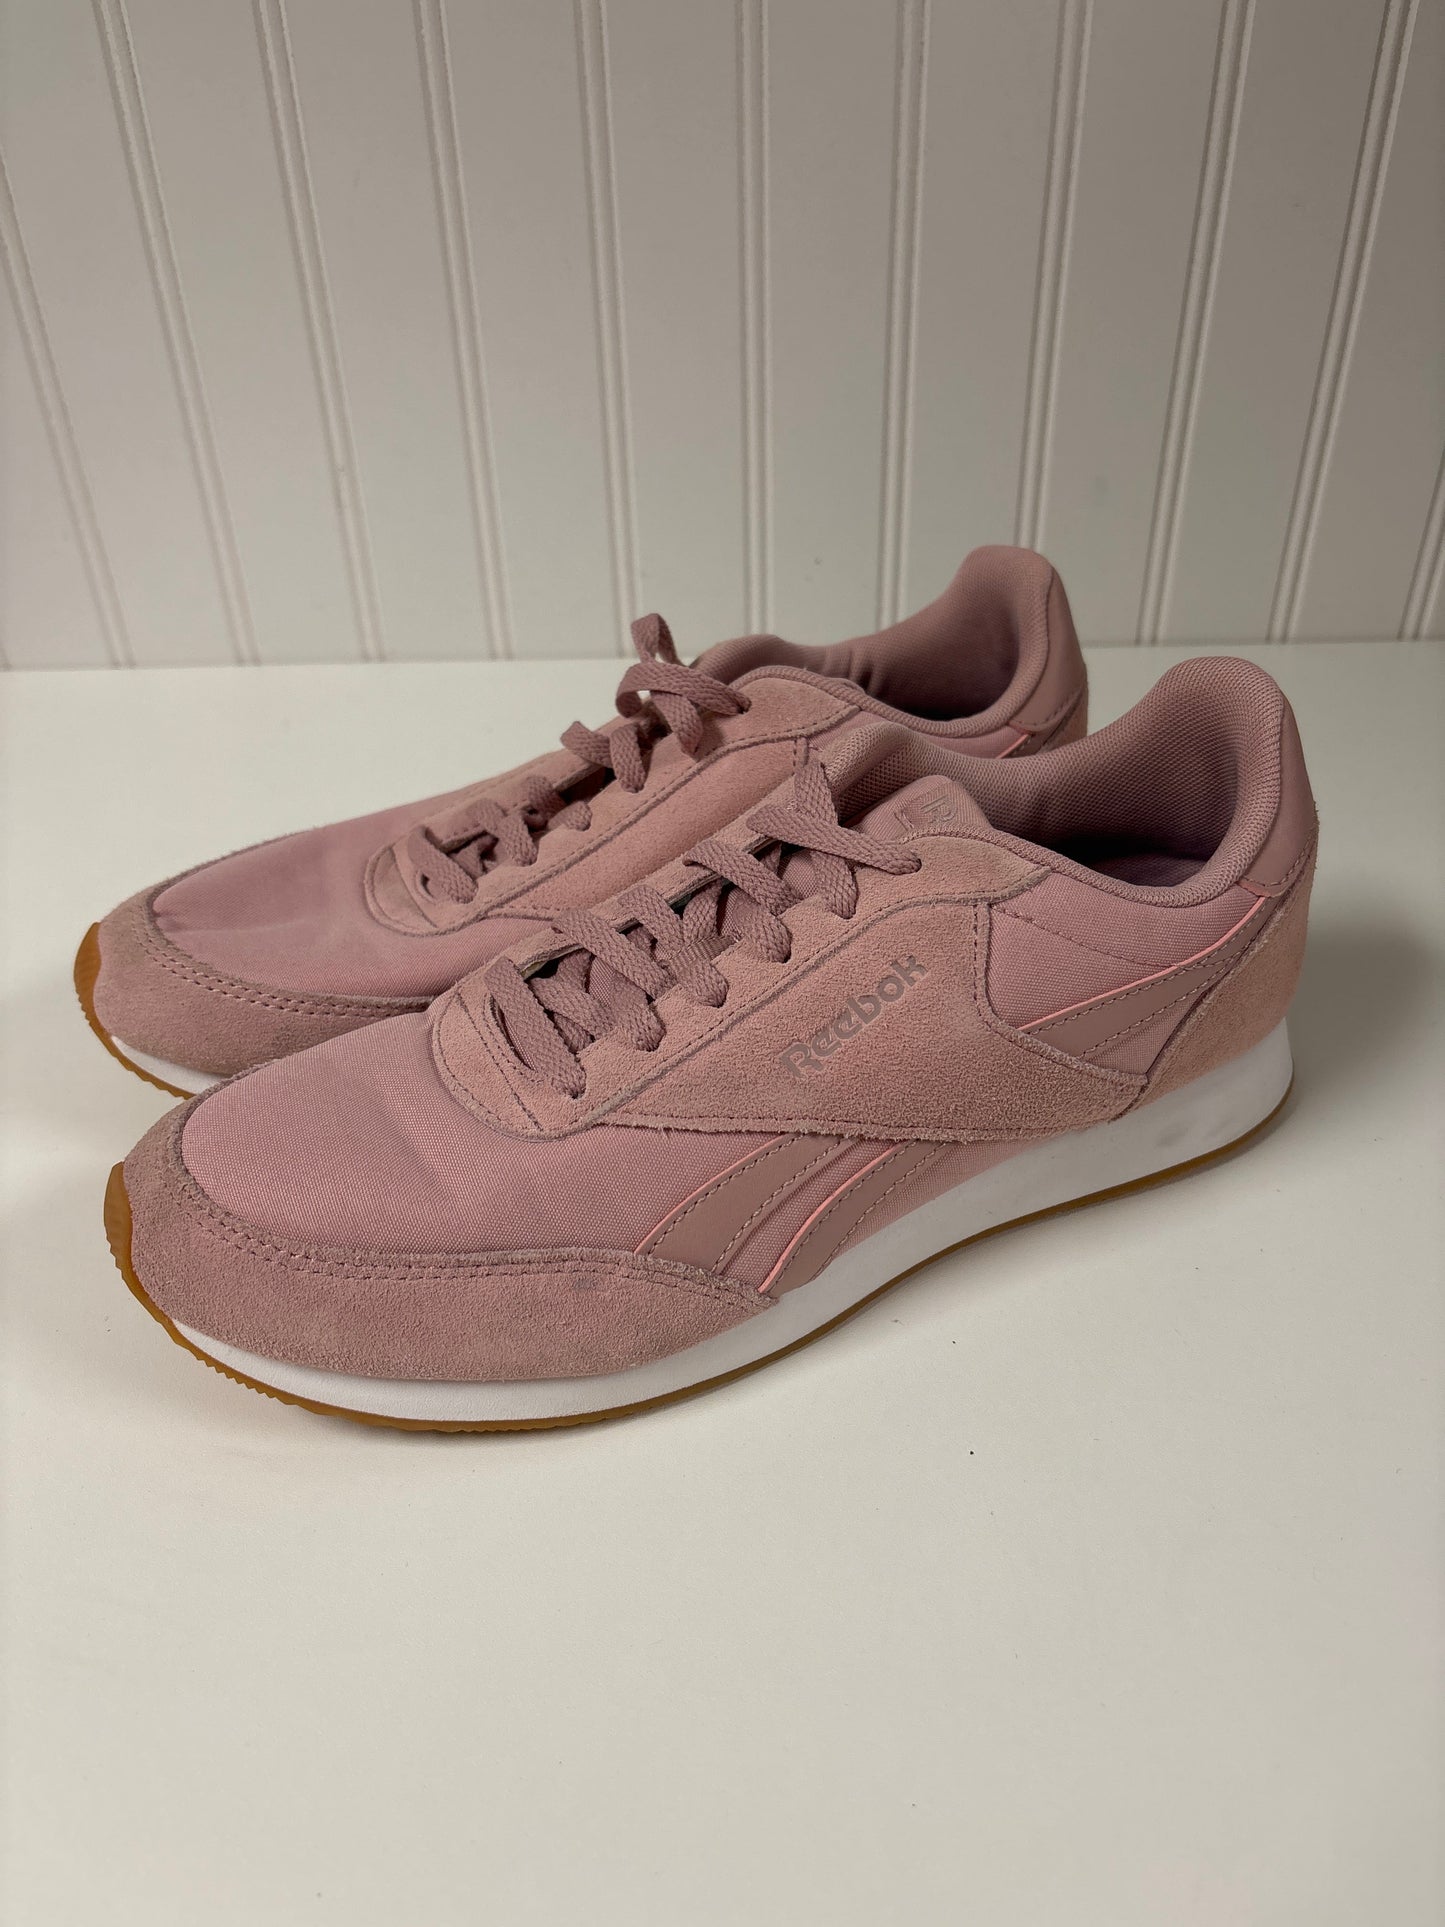 Pink Shoes Sneakers Reebok, Size 8